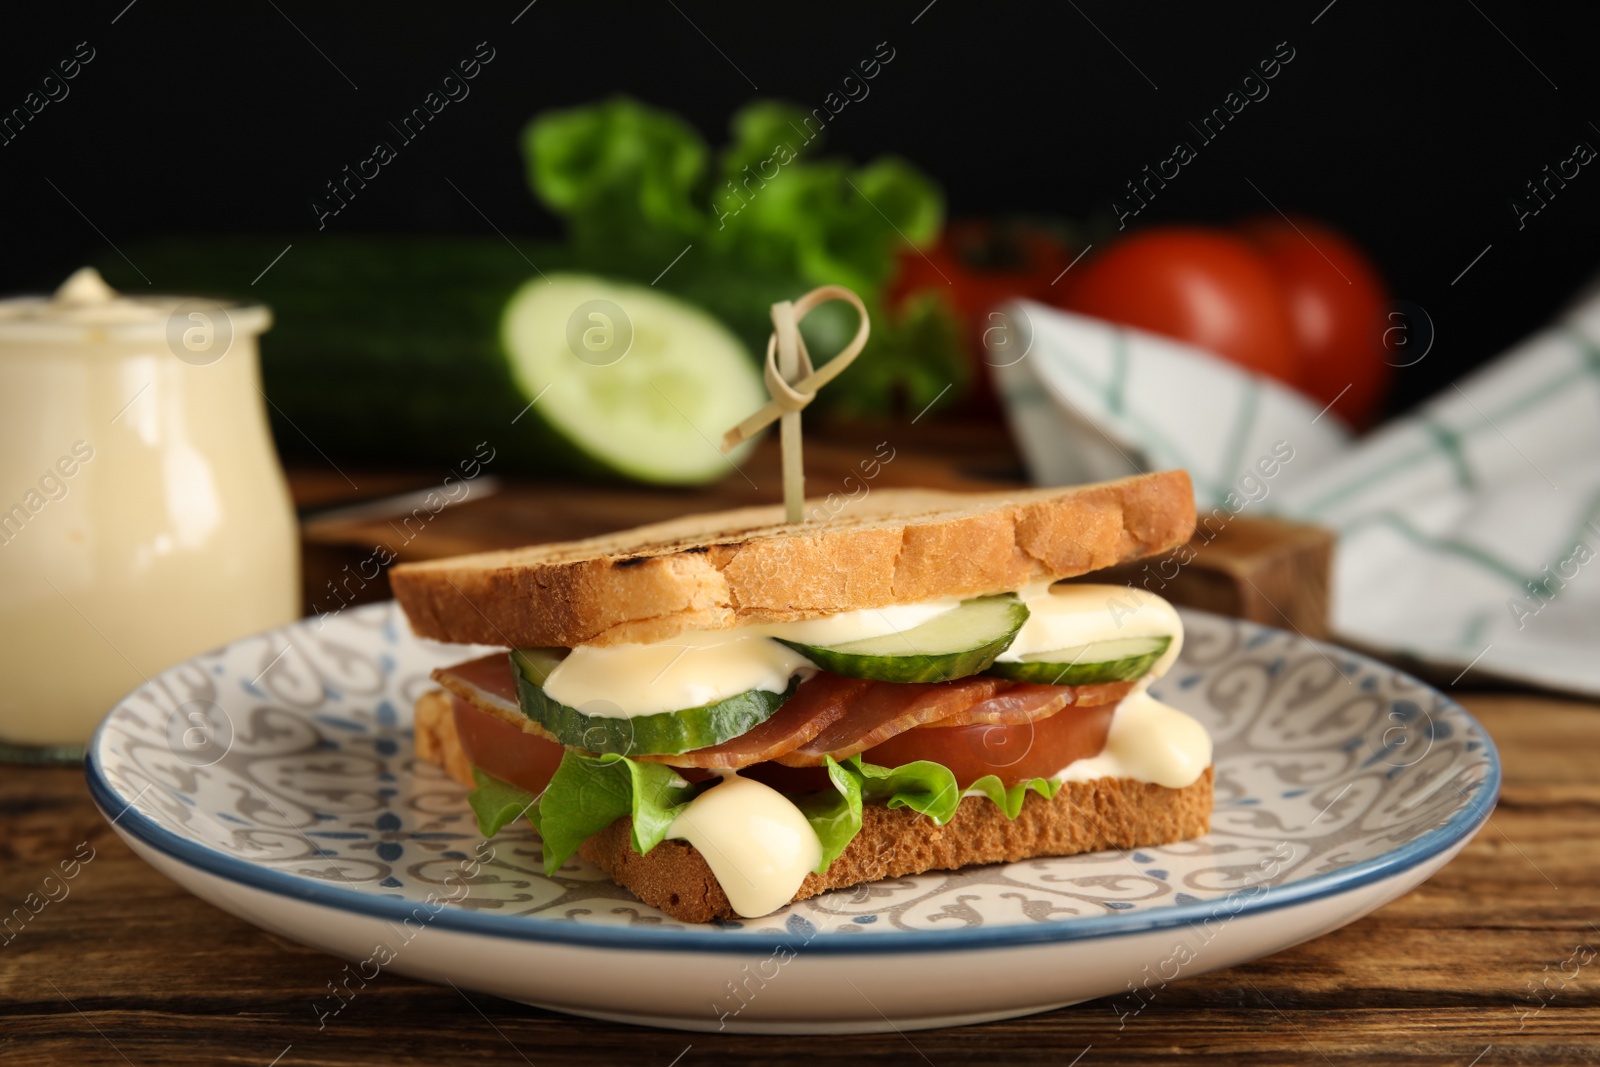 Photo of Delicious sandwich with vegetables, ham and mayonnaise served on wooden table